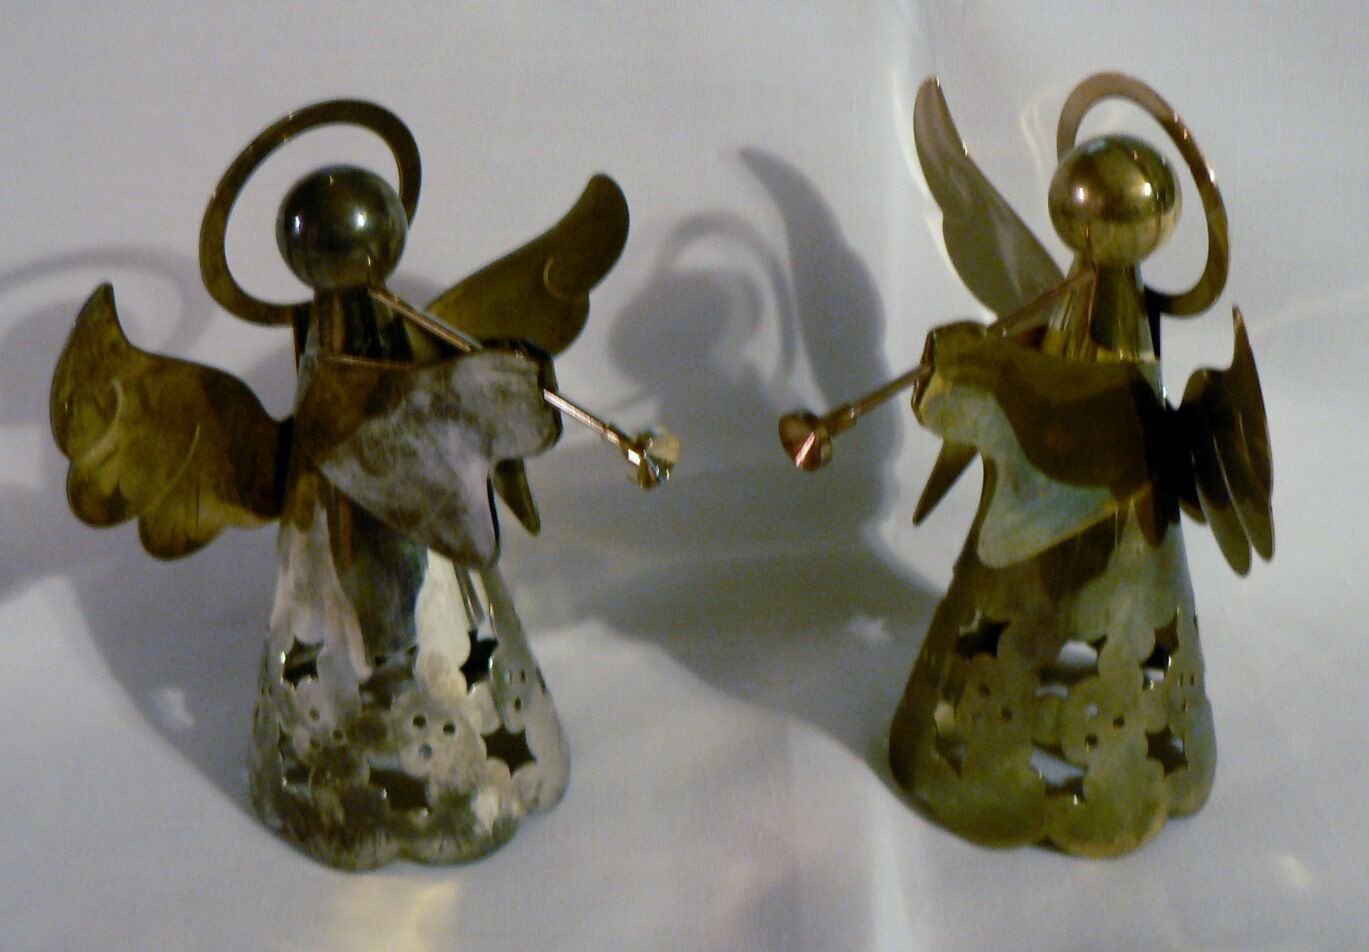 Set of 2 Vintage Angel Christmas Ornament Figurine Silver and Gold Metal